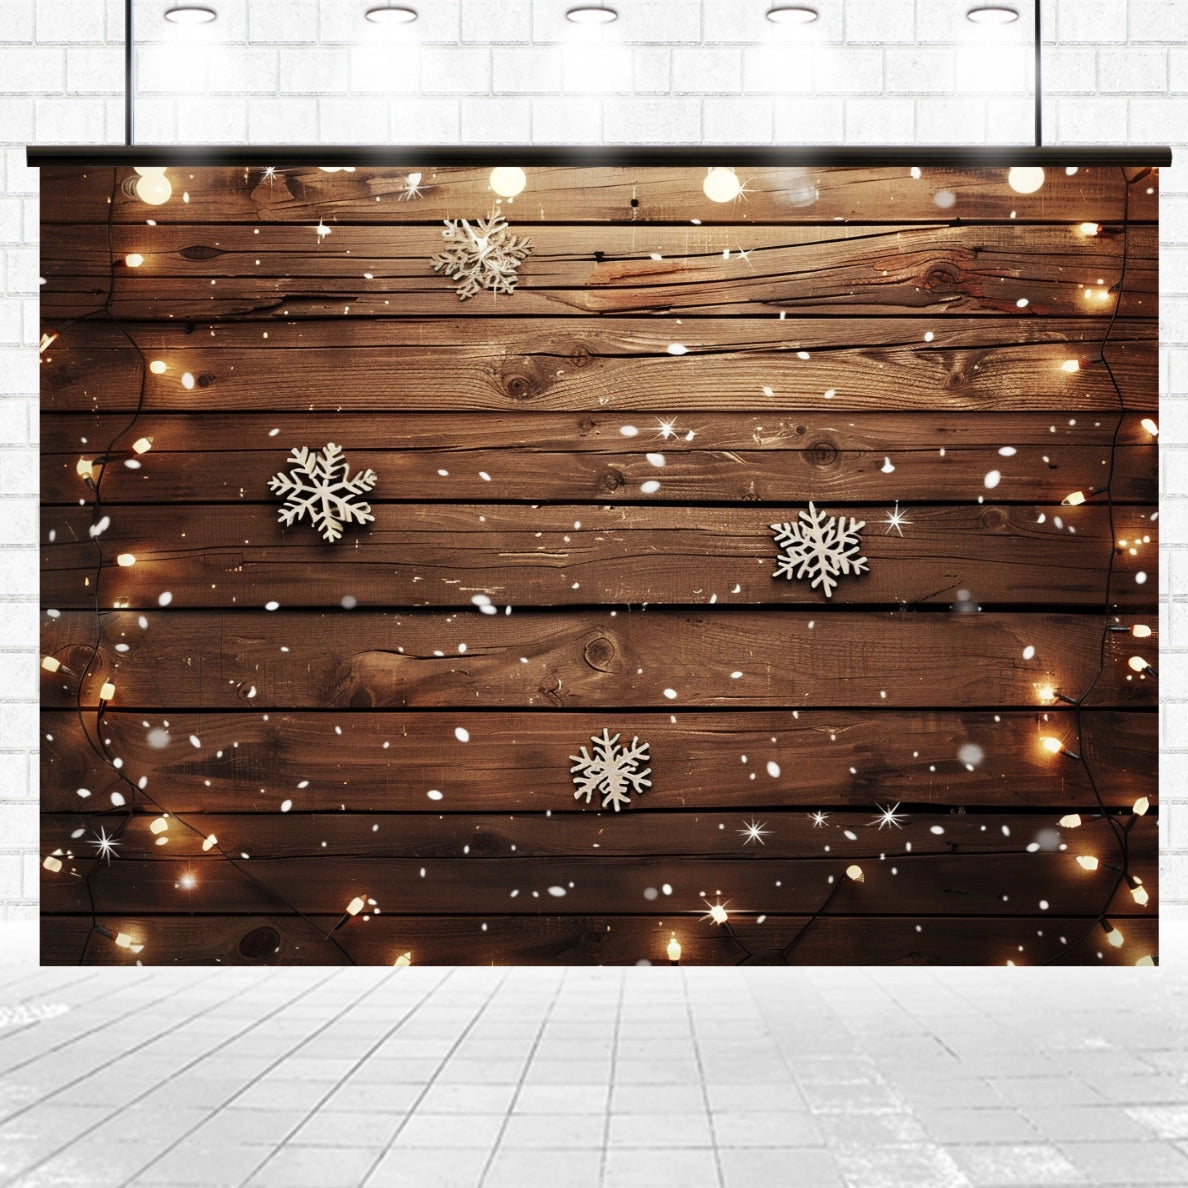 Vintage wooden backdrop decorated with string lights and snowflakes, set in a white-tiled room with spotlights above featuring the ideasbackdrop Wood Photo Backdrop Snowflake Brown Wooden Wall Background Photography for Party Wedding Baby Photoshoot.